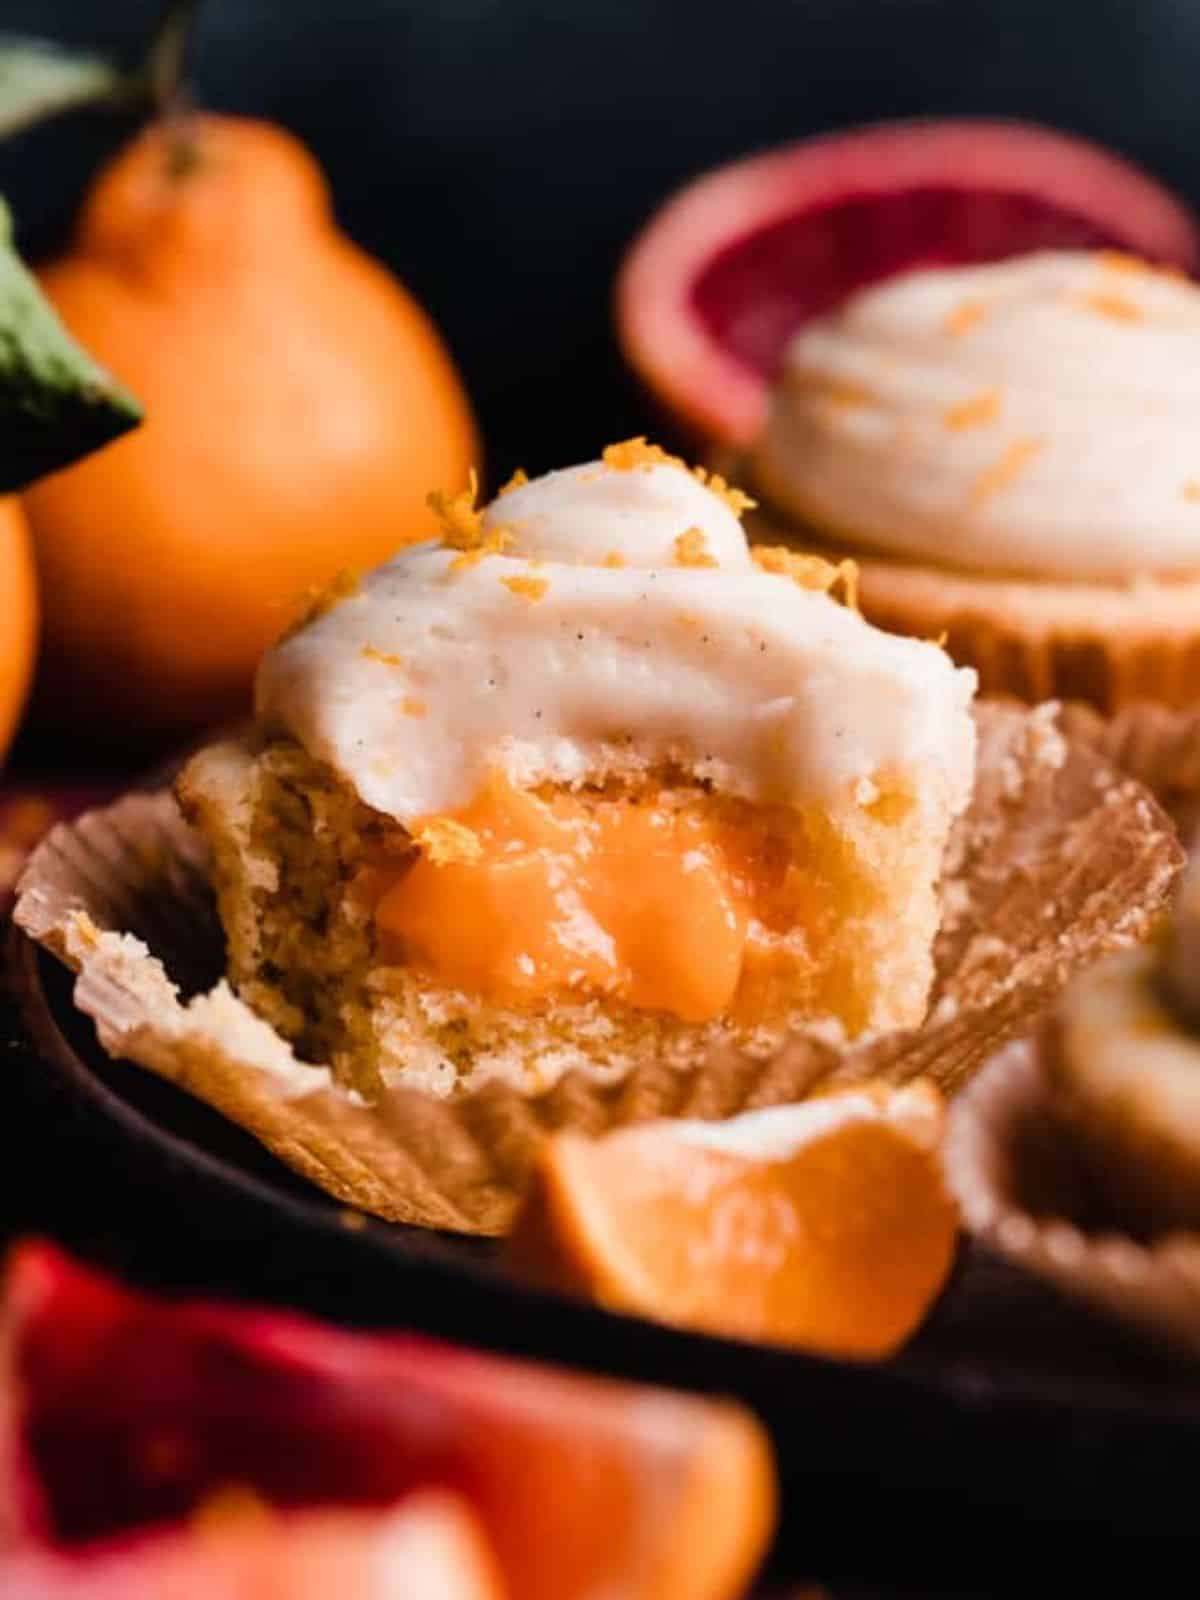 orange creamsicle cupcake with orange filling, topped with white frosting and orange zest.